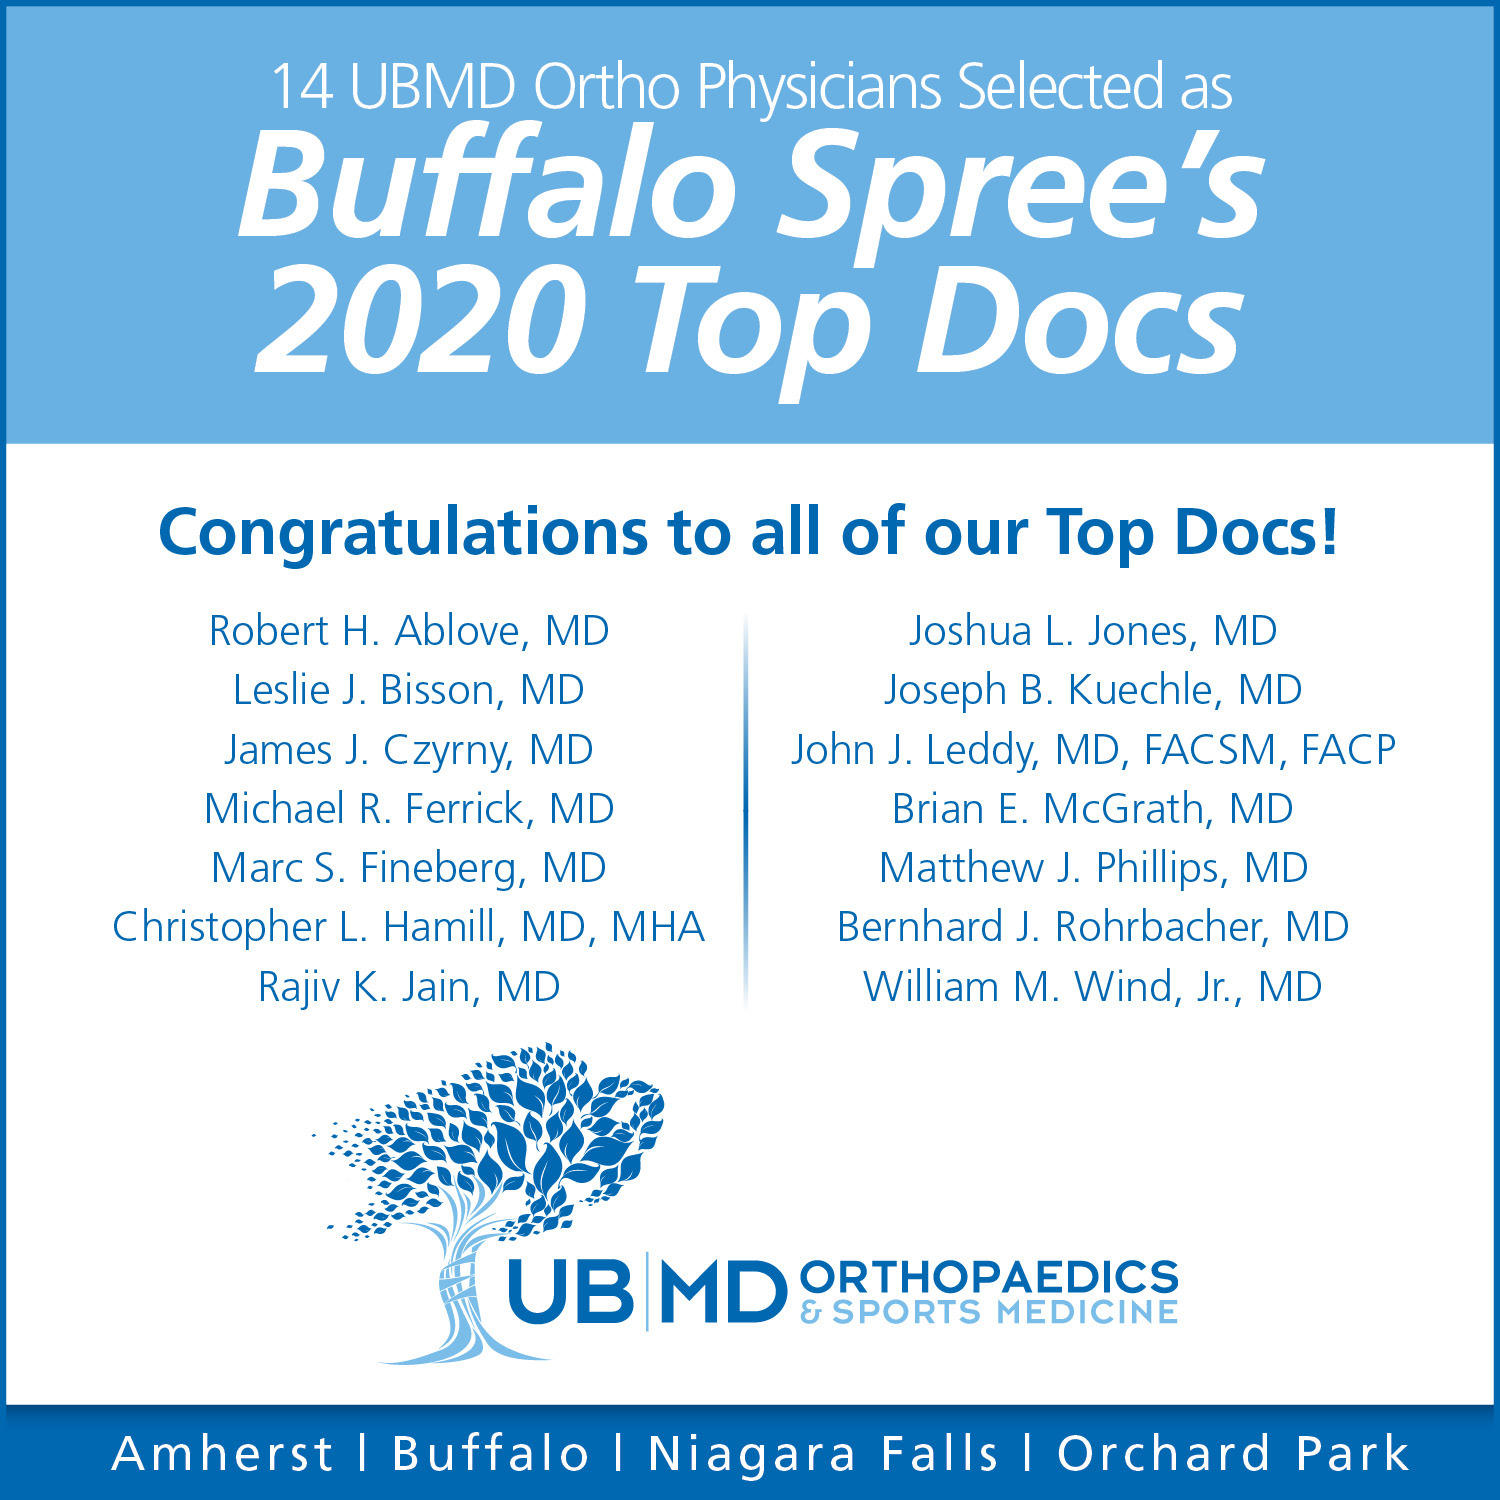 14 UBMD Ortho Physicians Selected as 2020 Buffalo Spree’s Top Docs